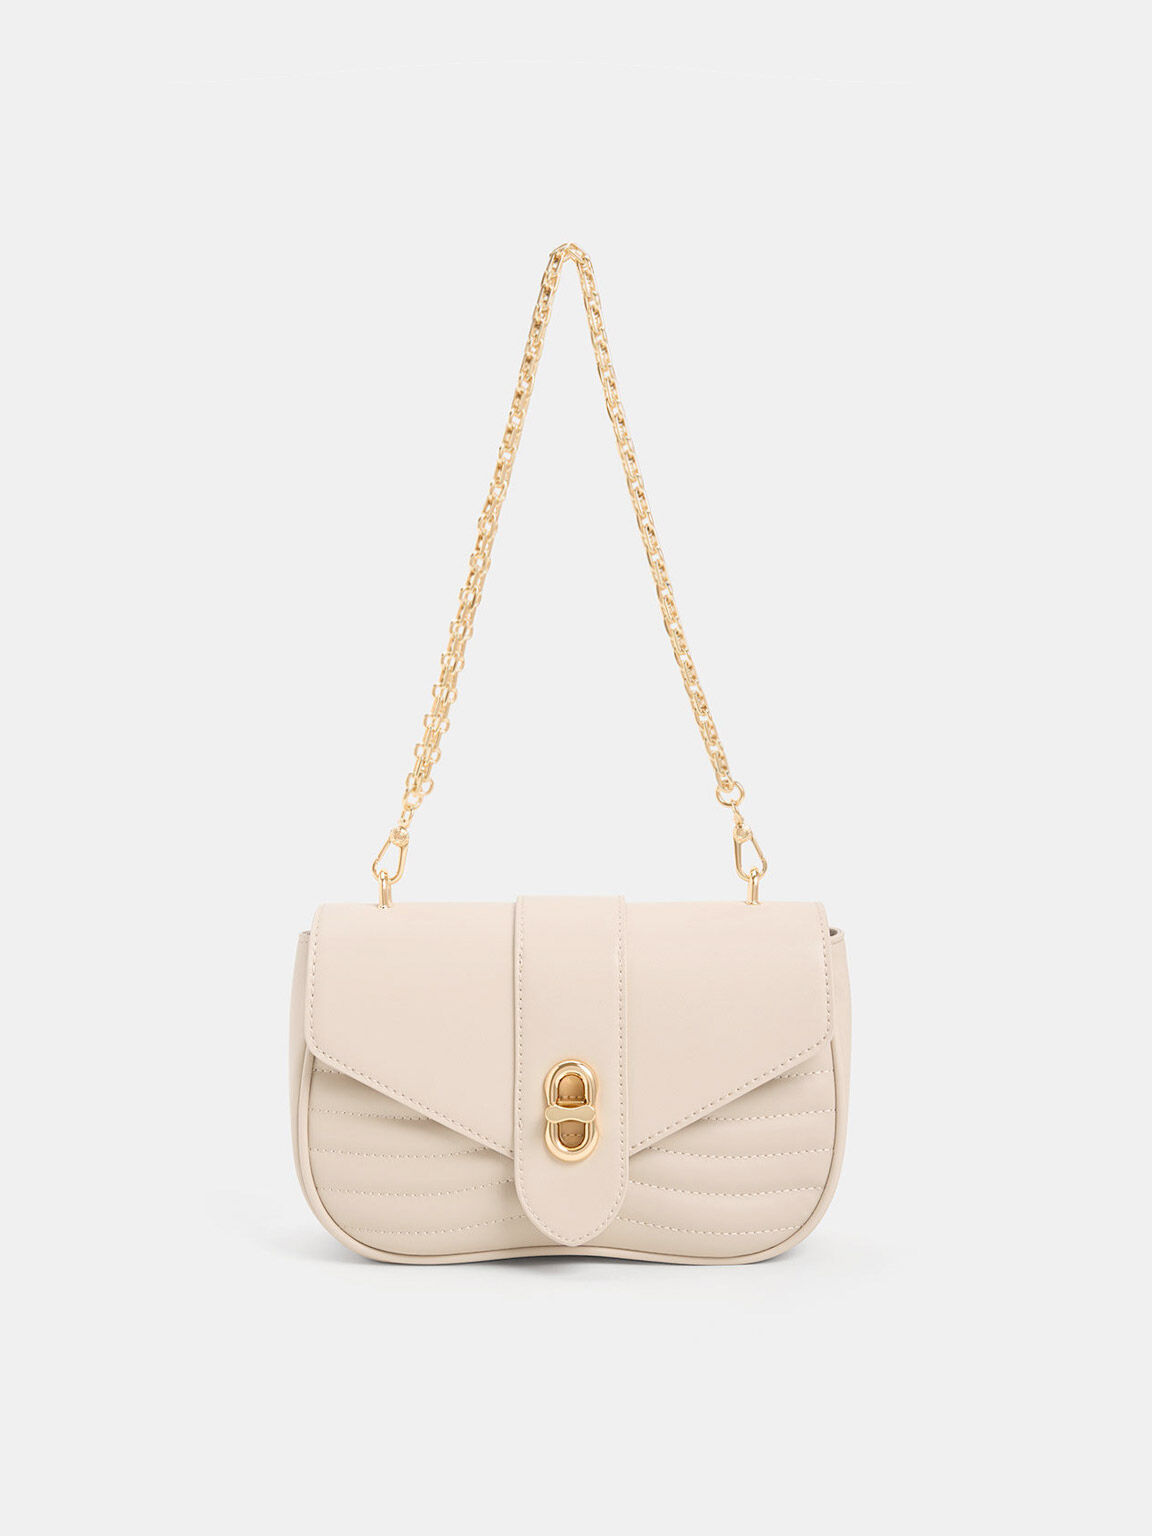 Shop Call it Spring Women's Bags up to 40% Off | DealDoodle